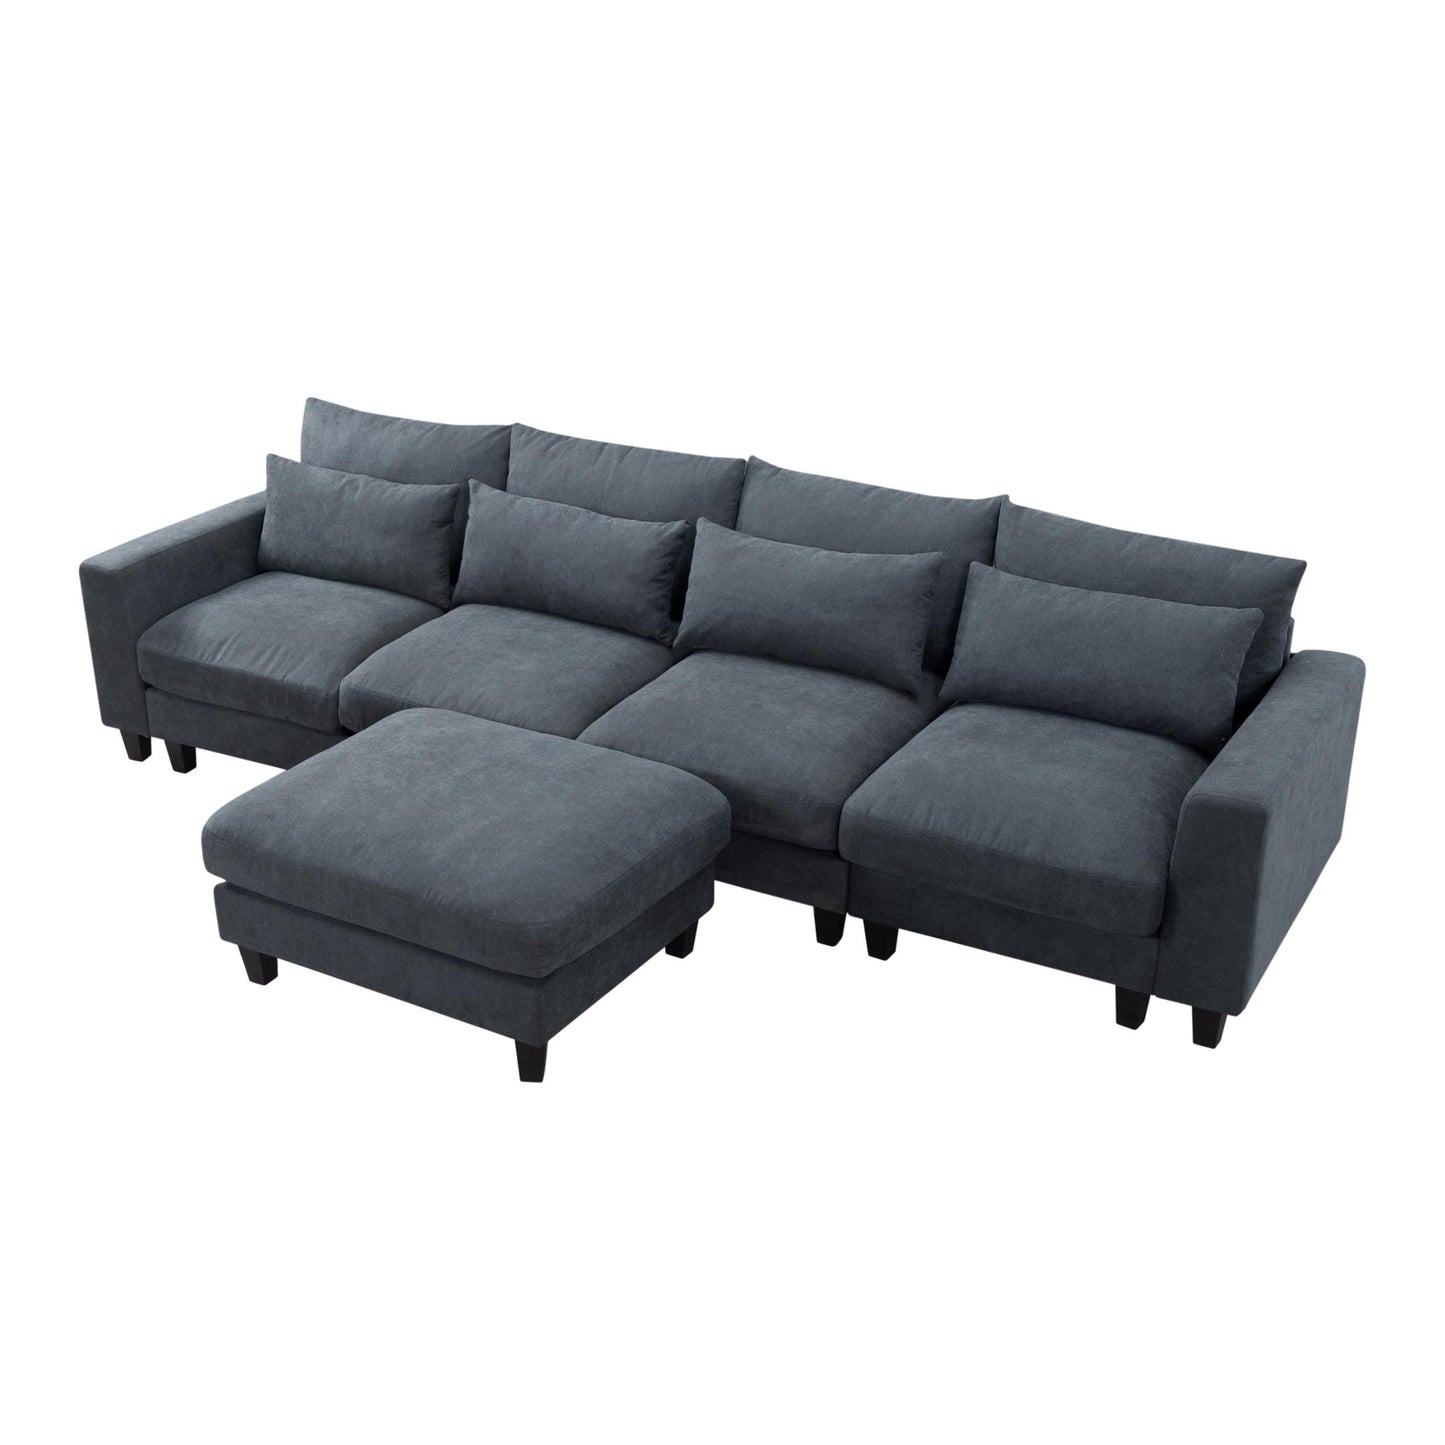 124.4” Modular L-Shaped Sectional Sofa with Ottoman